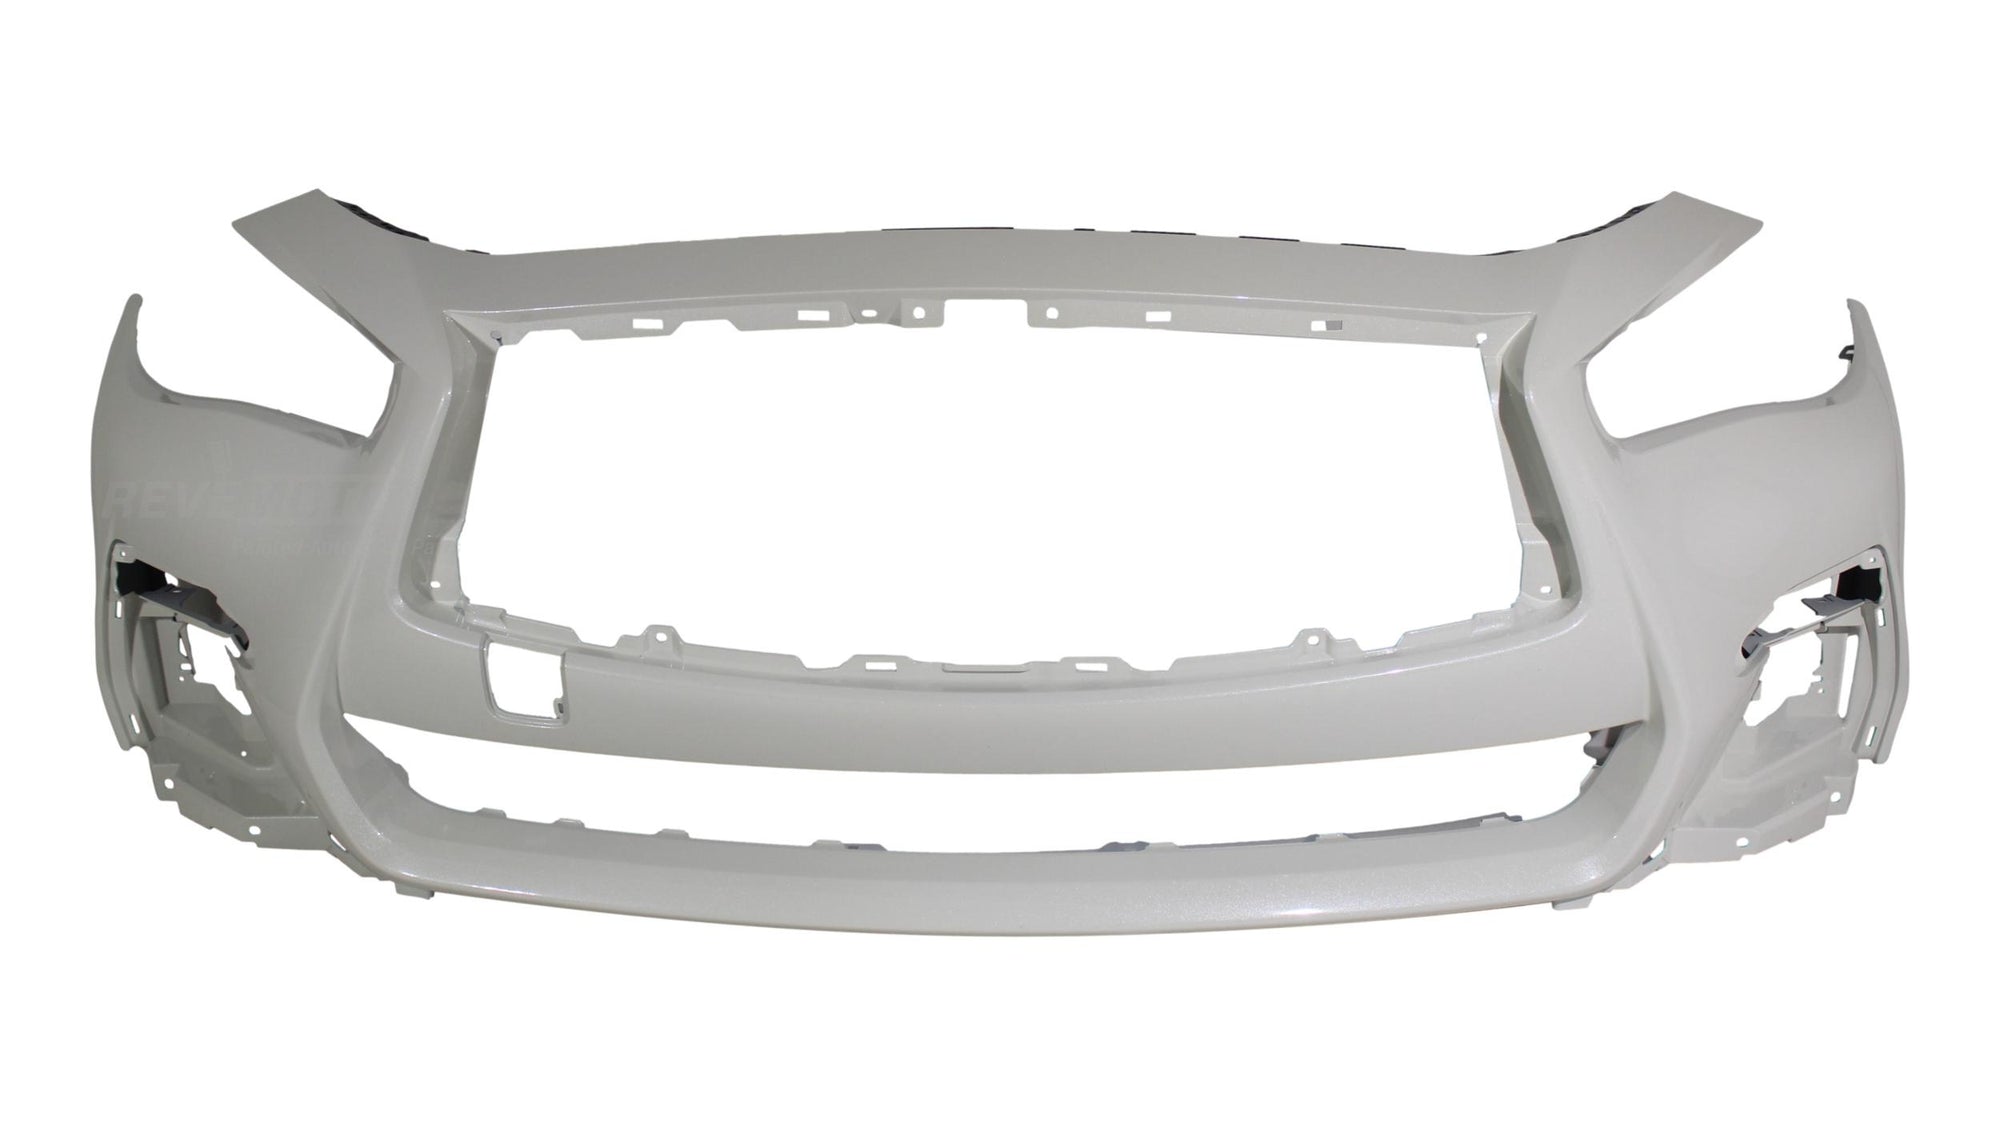 20627 - 2018-2020 Infiniti Q50 Front Bumper Painted (WITH: Sport | WITHOUT: Park Assist Sensor Holes) White Pearl (QAB) 620226HJ0H IN1000282